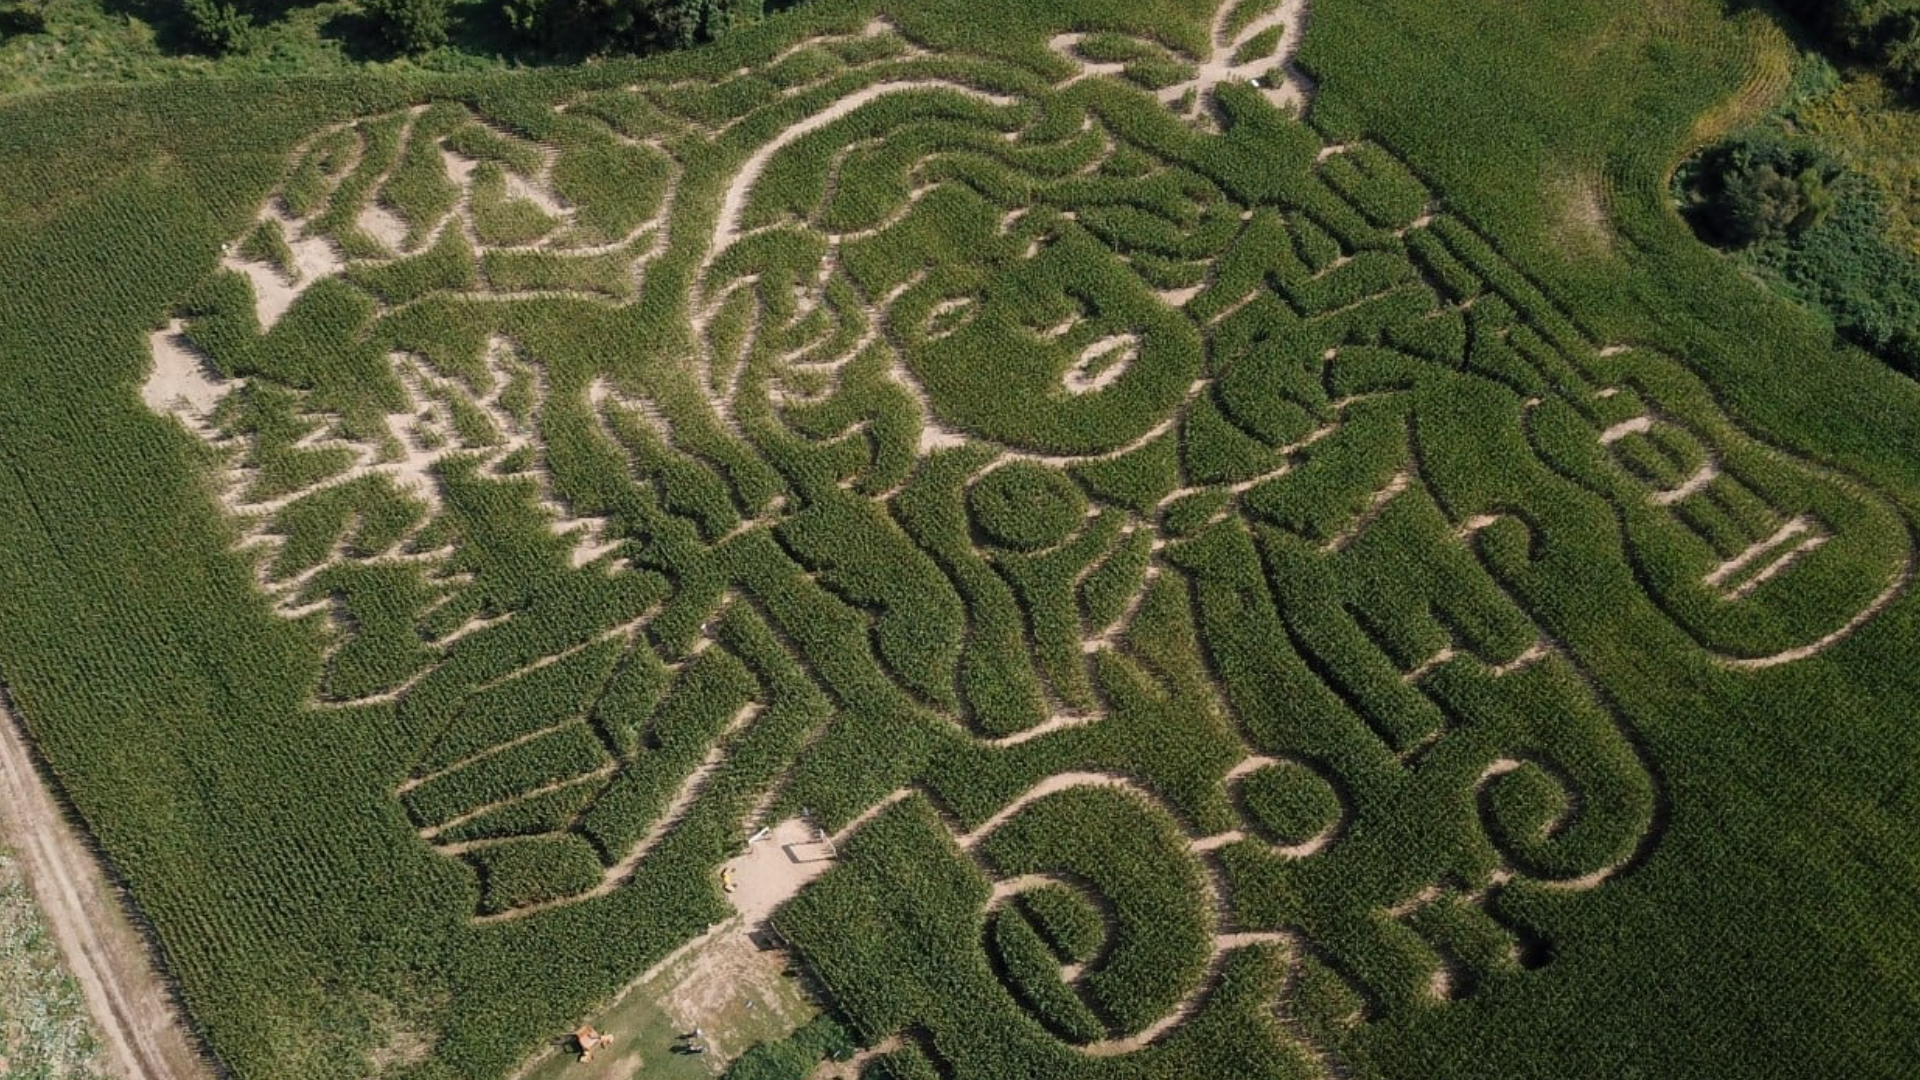 Check out this year’s Dolly Parton corn maze at Van Buren Acres. The farm is now open for all your pumpkin picking needs.